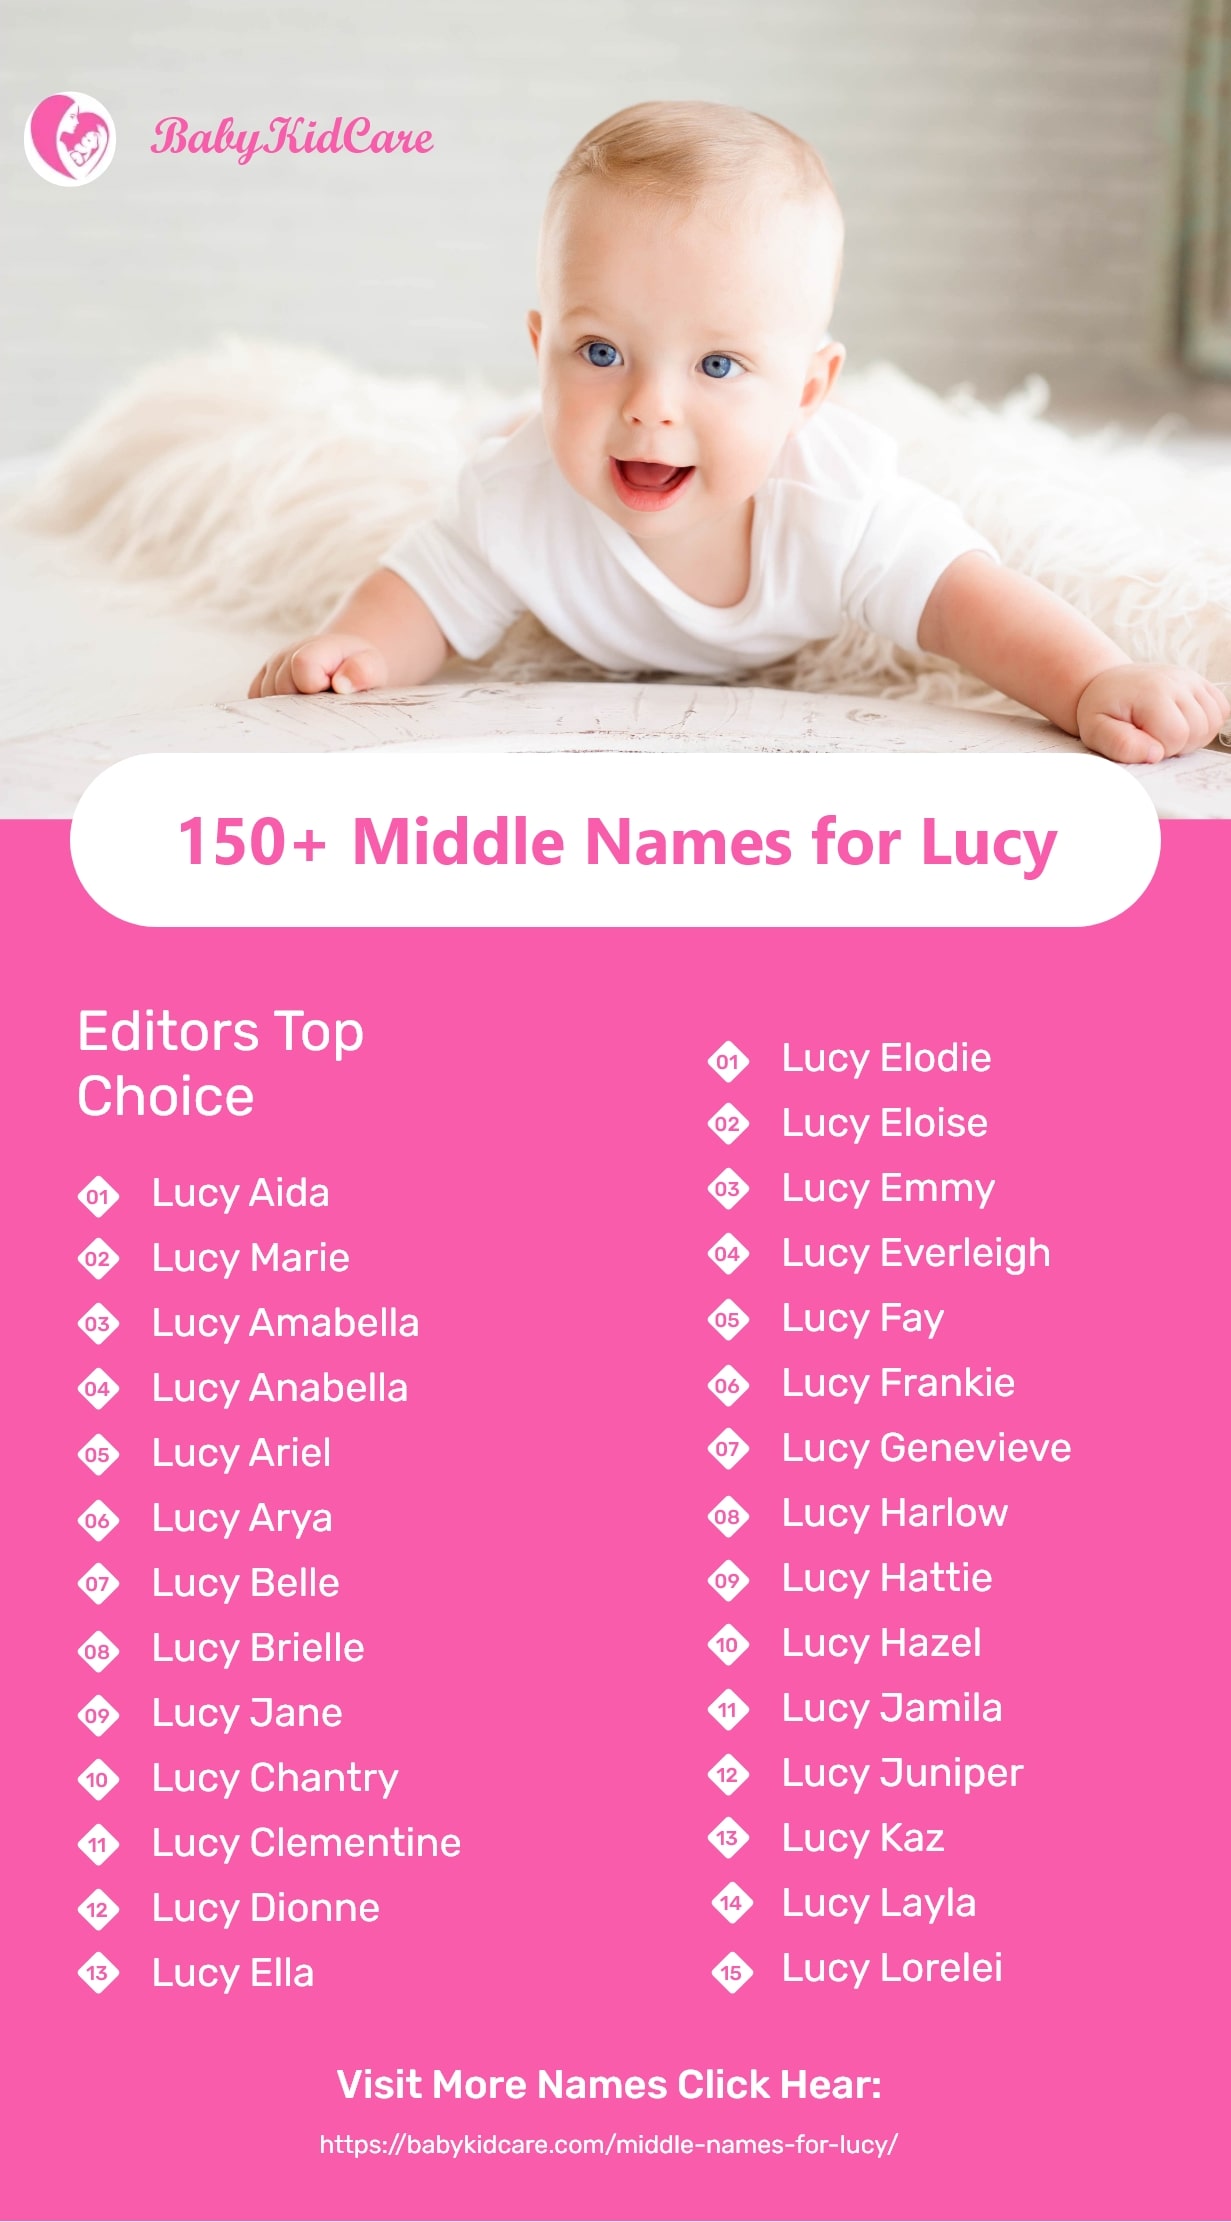 Middle Names for Lucy